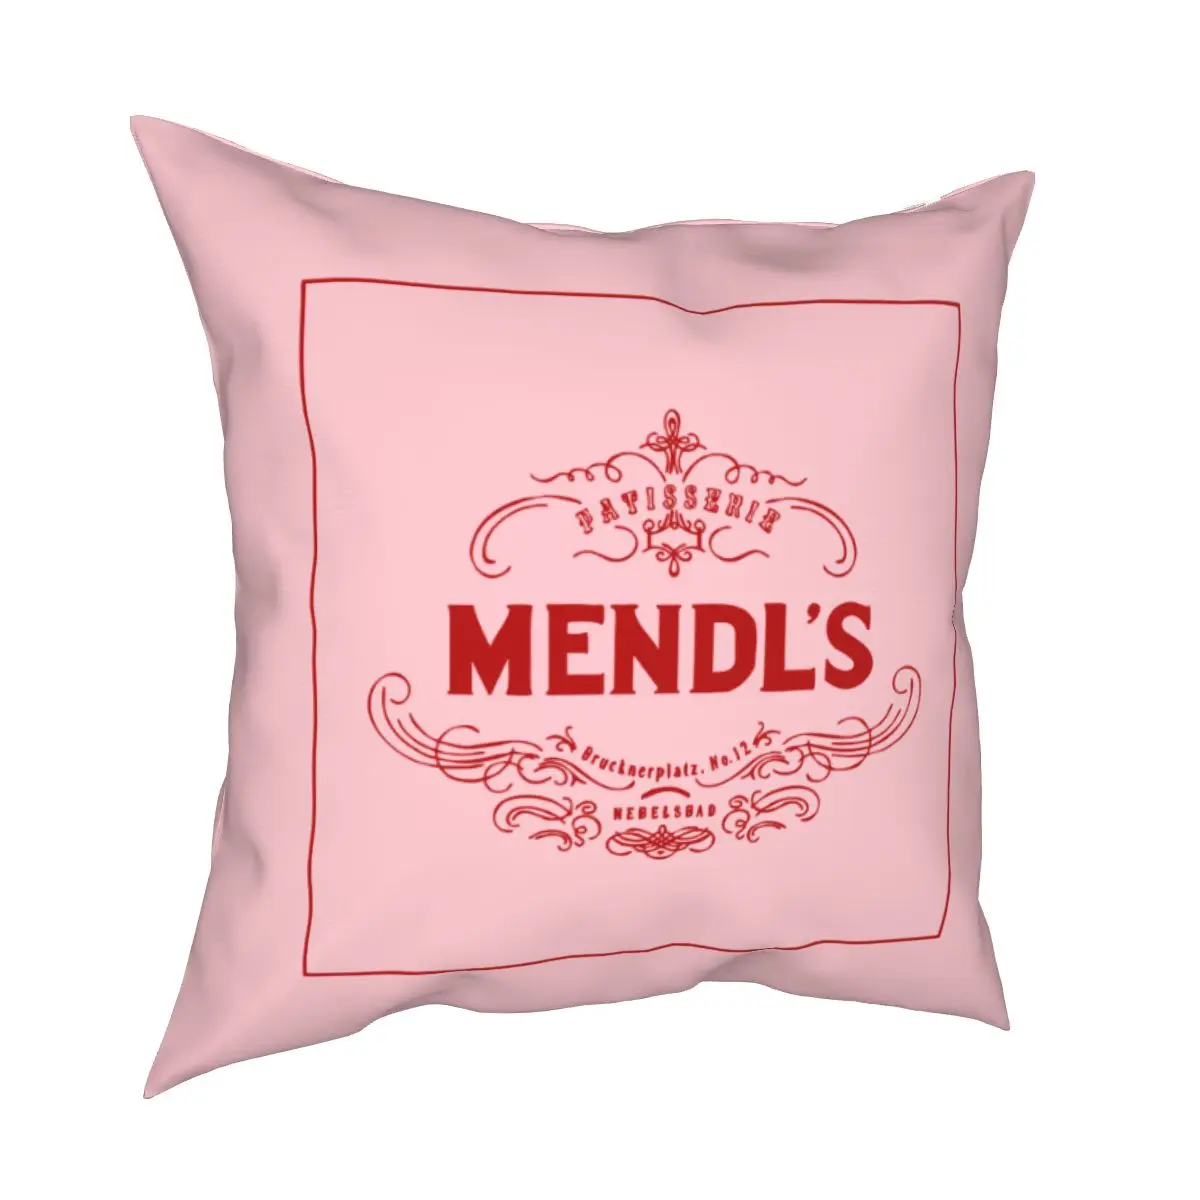 

Mendl the Patisserie Kissen Fall The Grand Budapest Hotel Wes Anderson Film Pillows Coverage Decor Pillows for Rooms 45*45cm